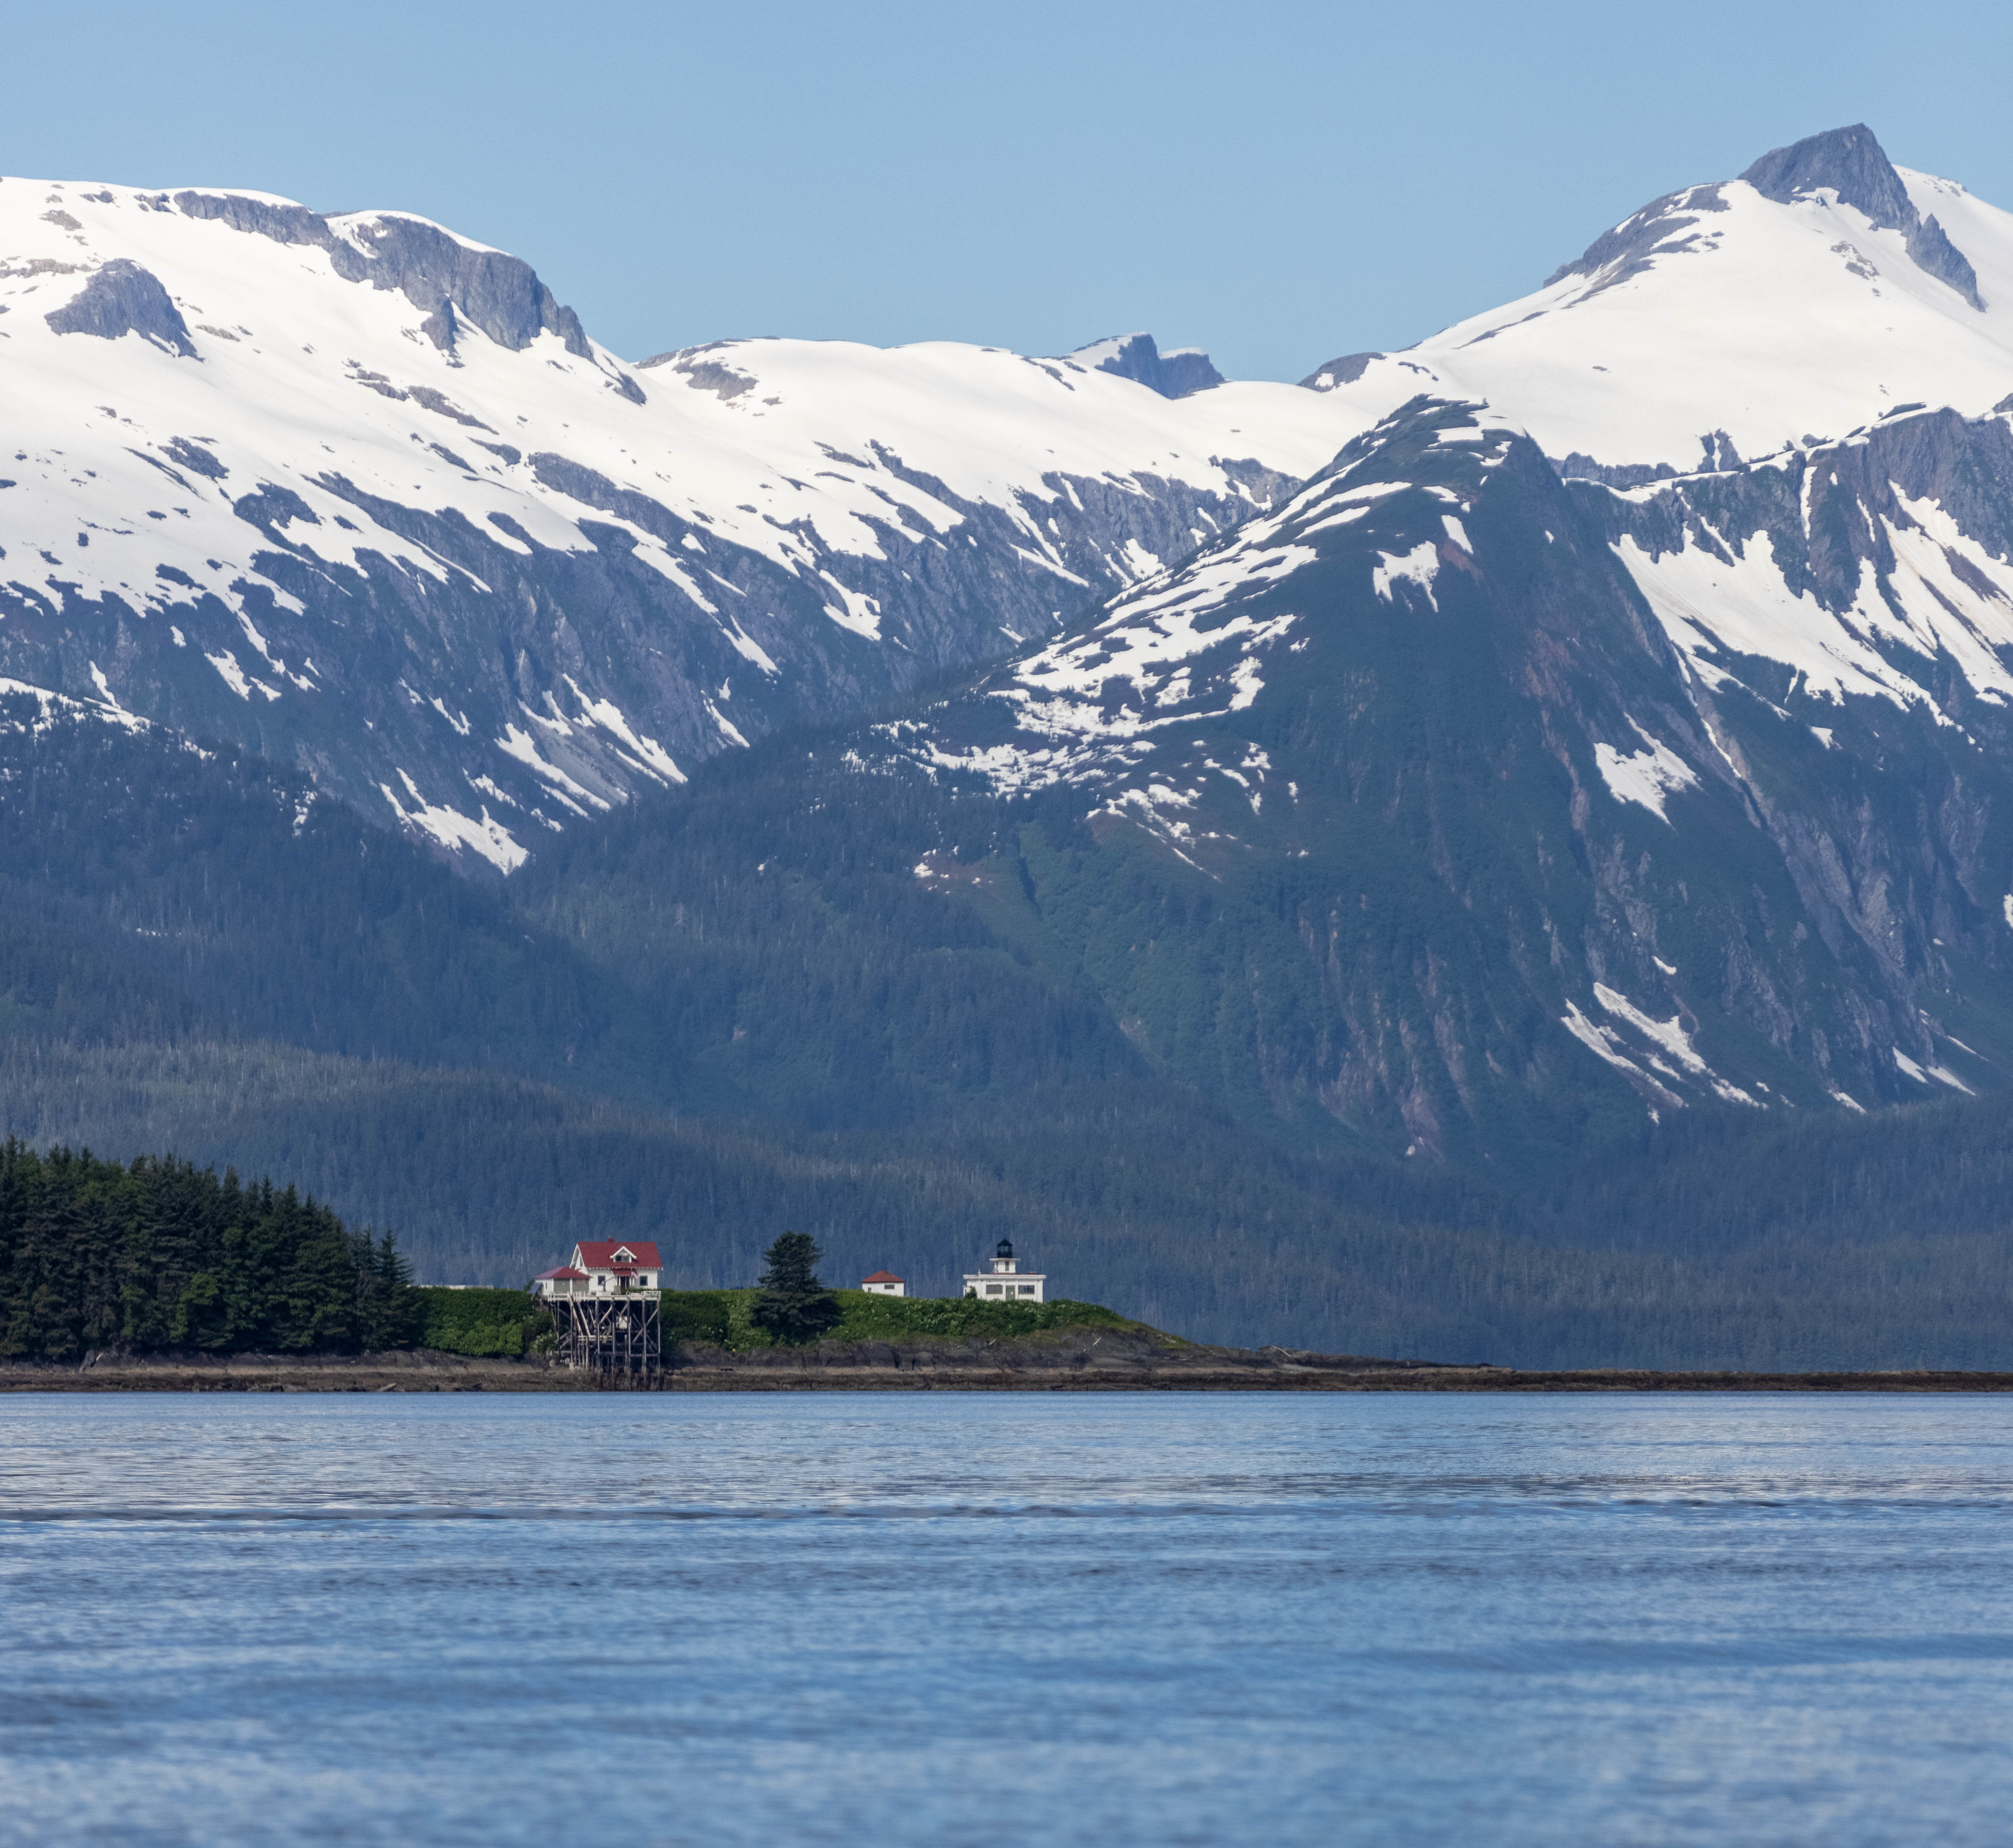 A lighthouse on an island in Alaska with mountains in the background 